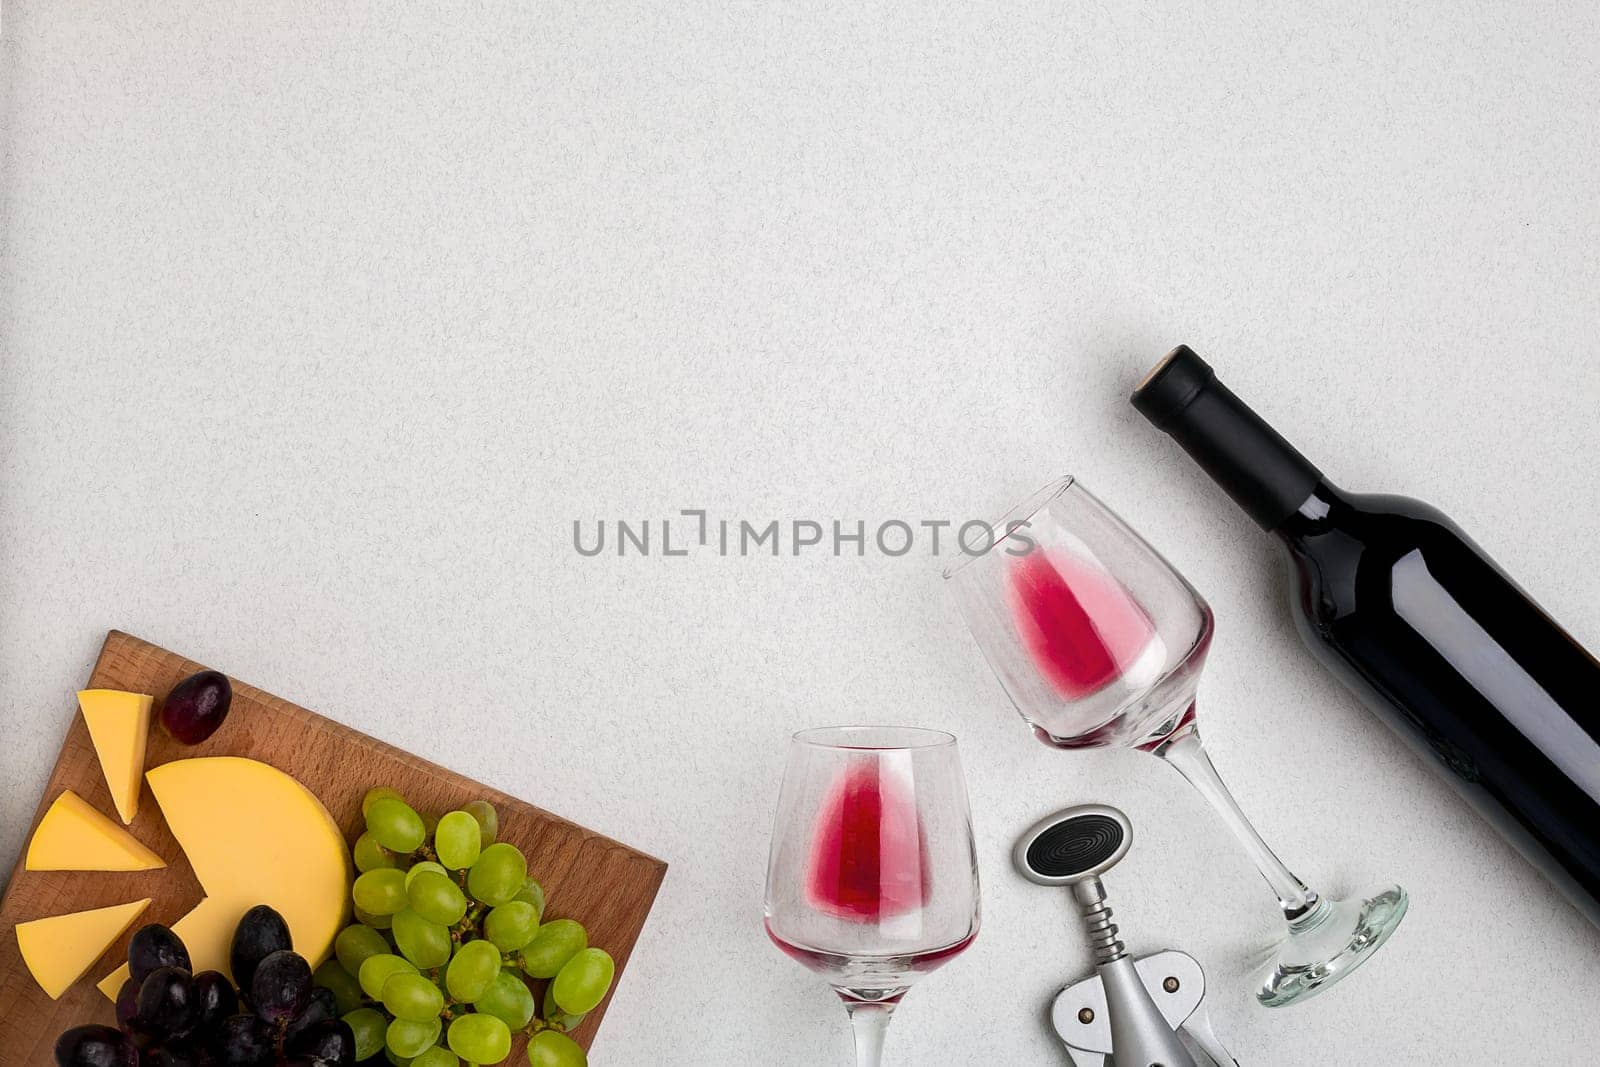 Wine, glasses and corkscrew over white background. Top view with copy space